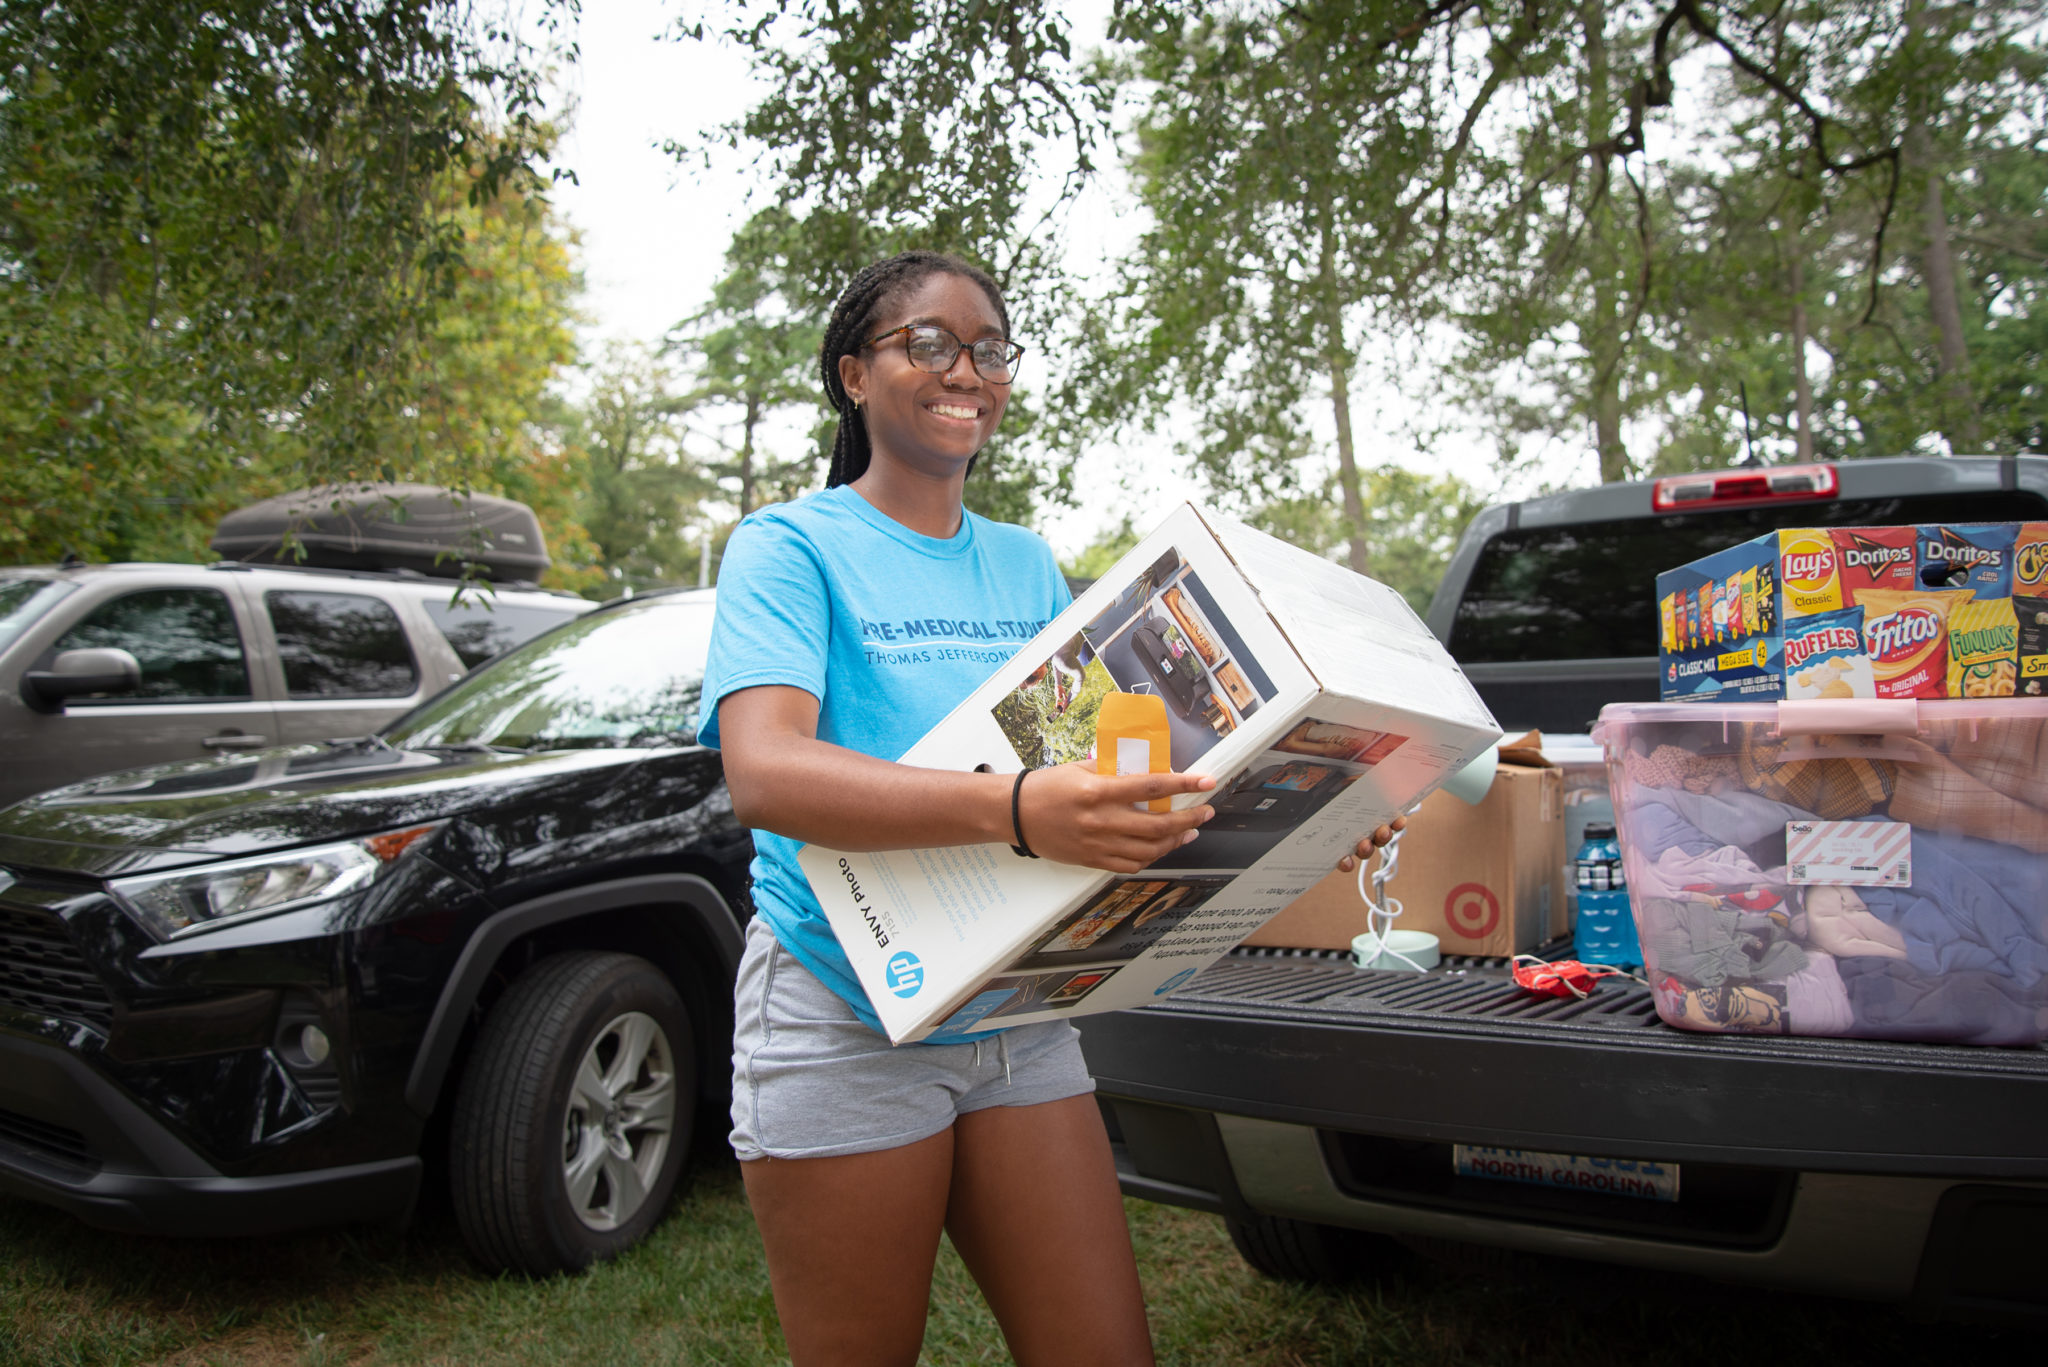 Sights from move-in day